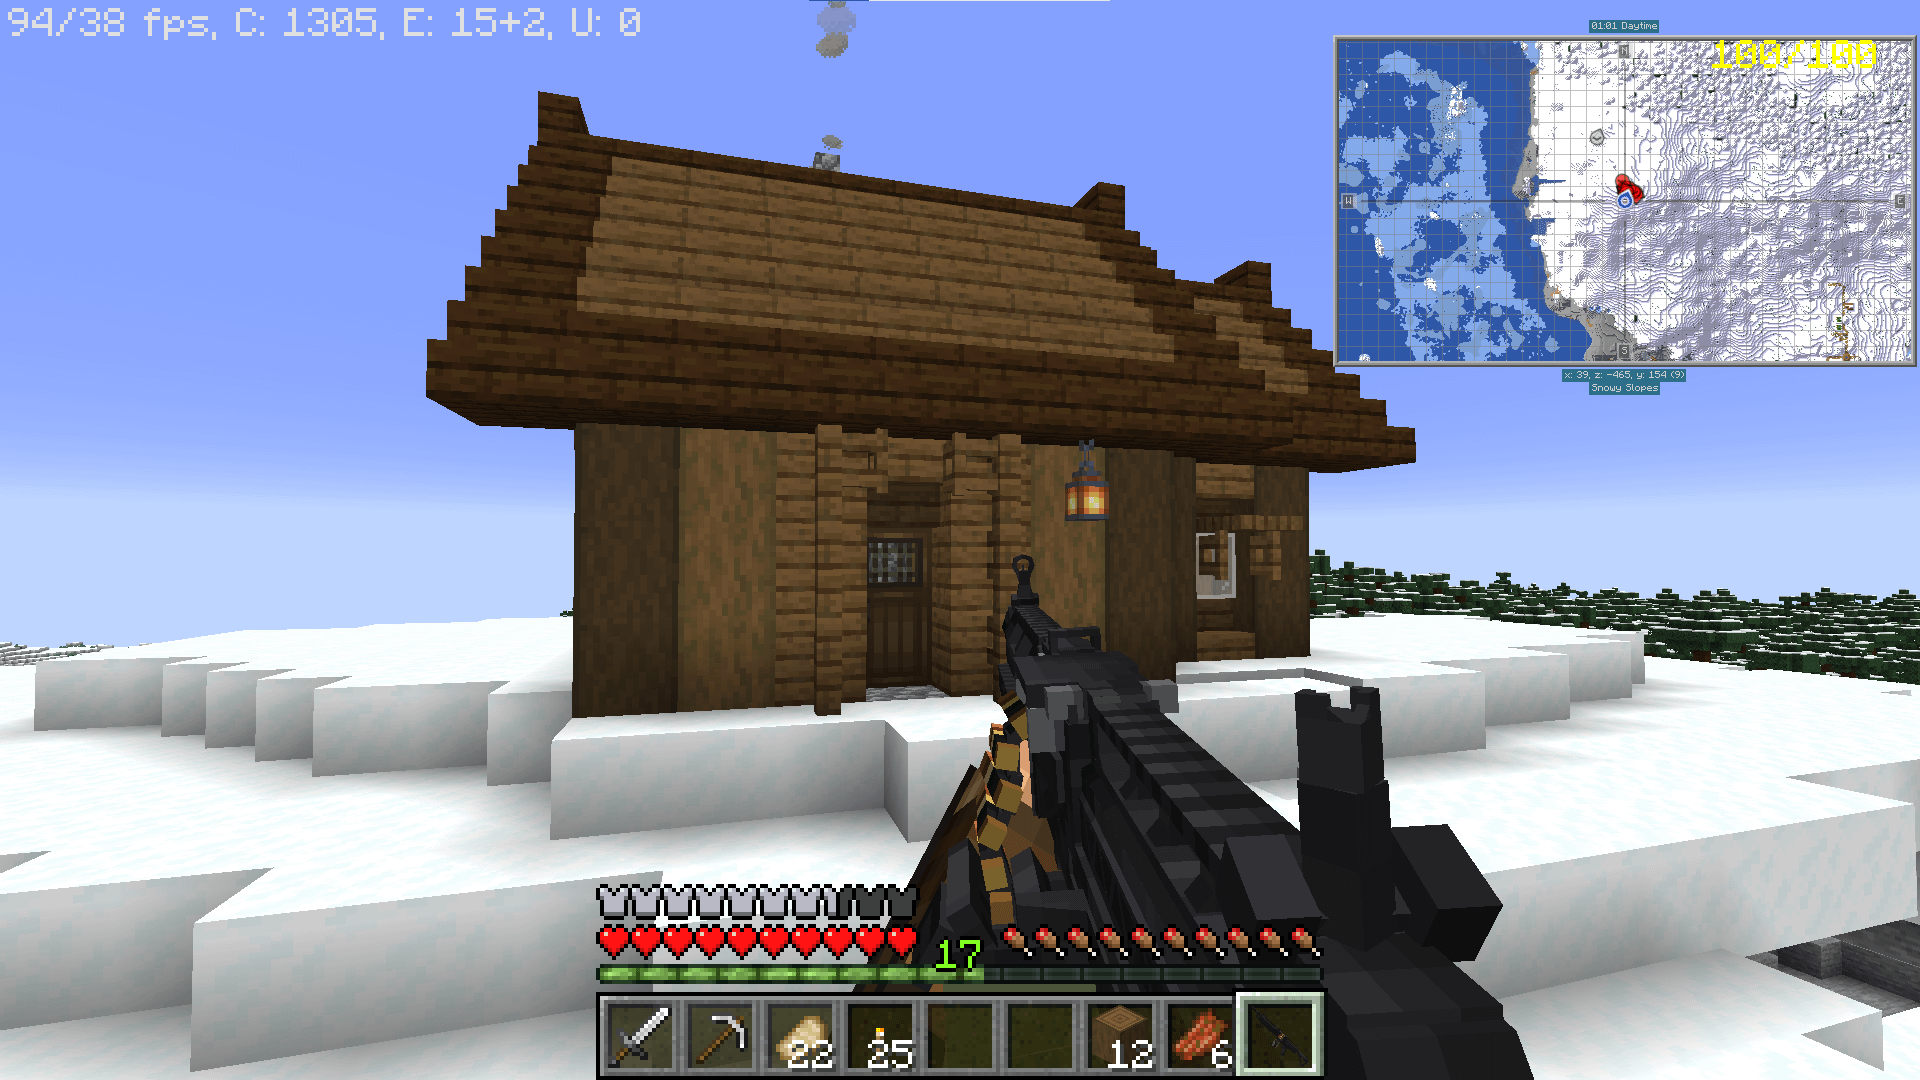 Minecraft Memes - "Rate my epic survival base, bro"